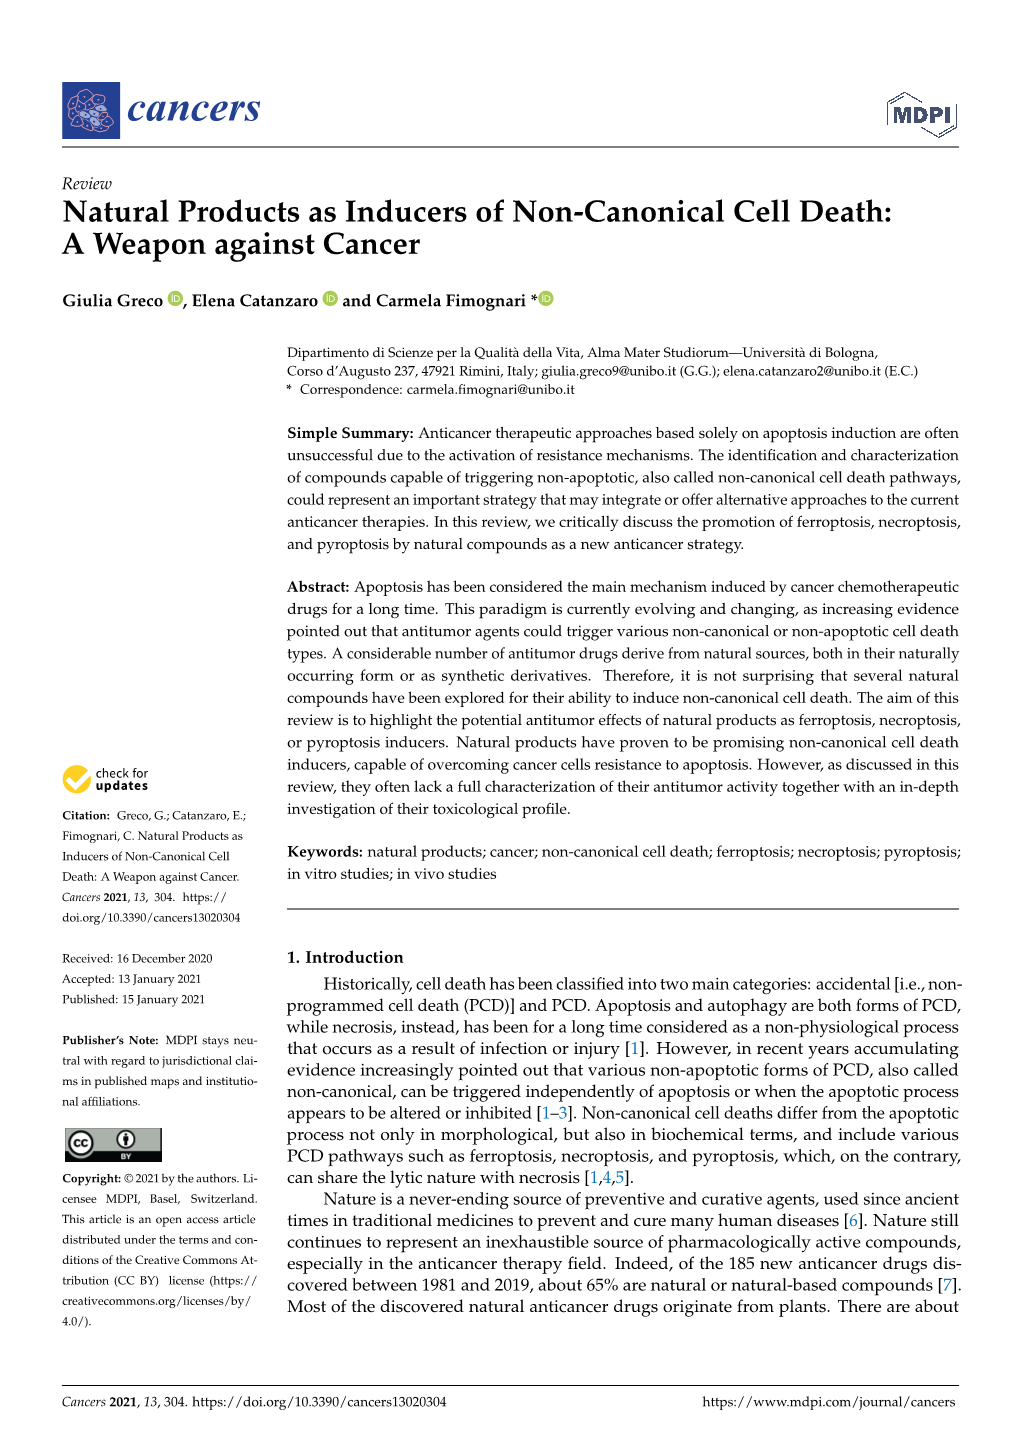 Natural Products As Inducers of Non-Canonical Cell Death: a Weapon Against Cancer